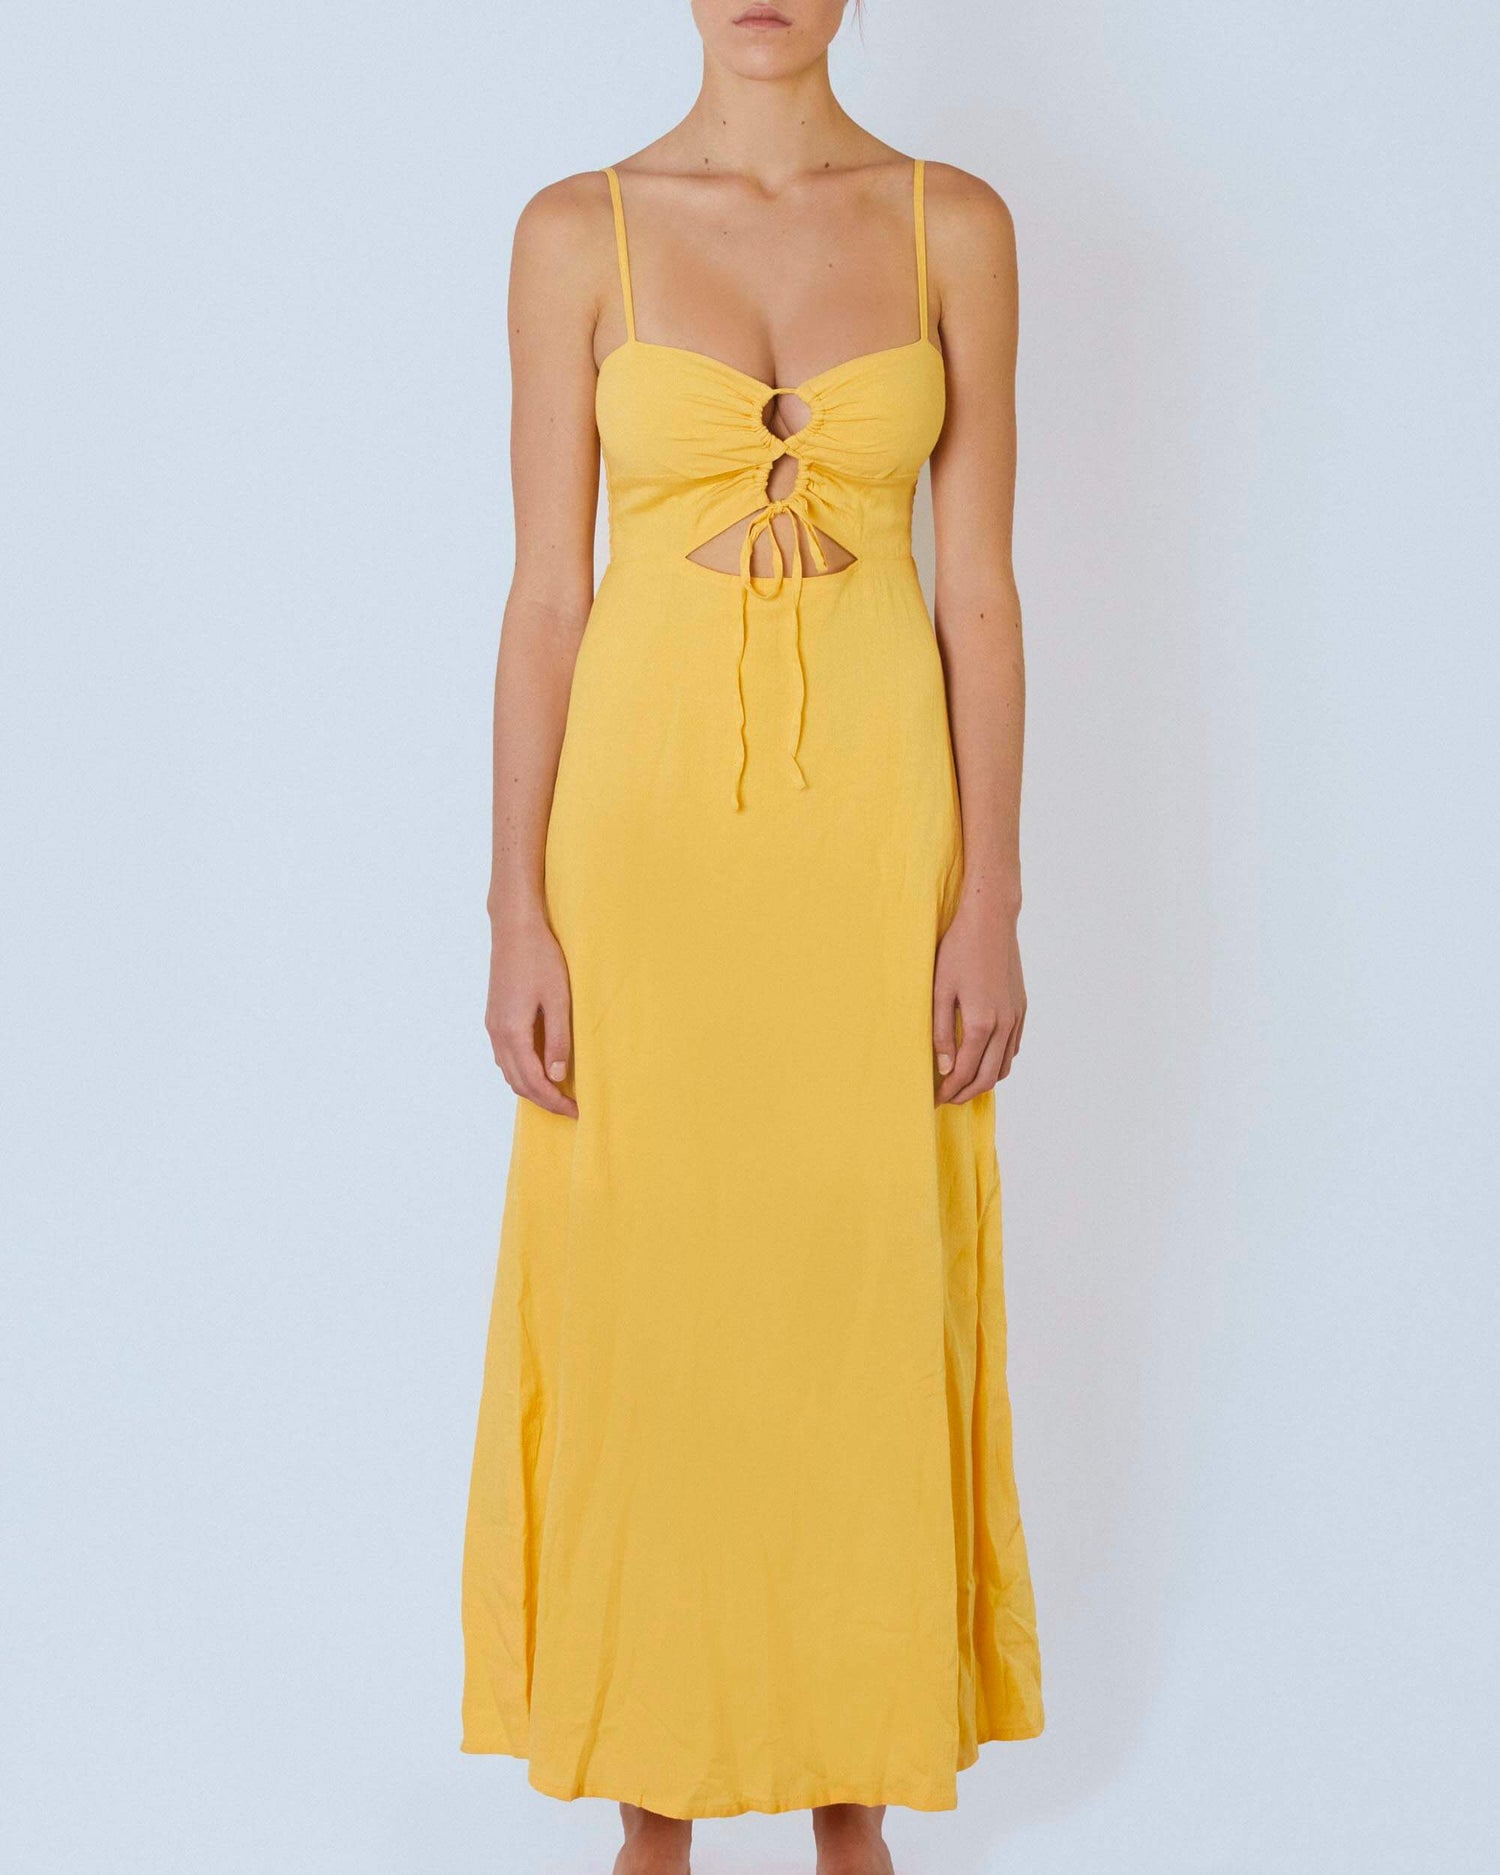 Its now cool DRESS(4FRONT) LIMA MAXI DRESS - SUNSET in Sunset